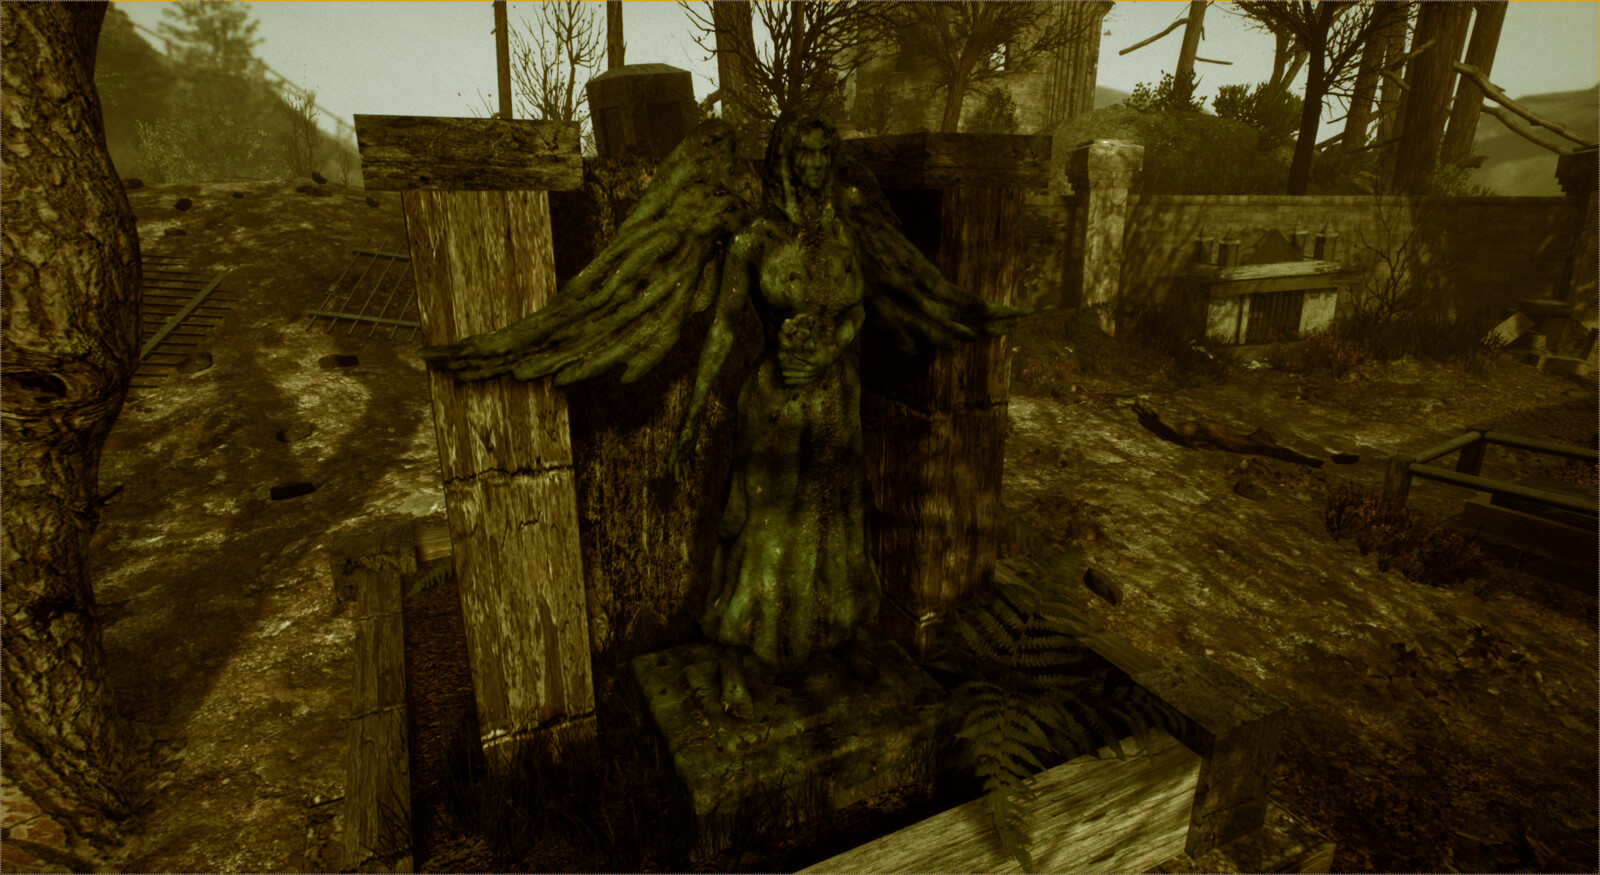 "SARKA" Work in progress game project-Unreal 4| Cemetery area #2